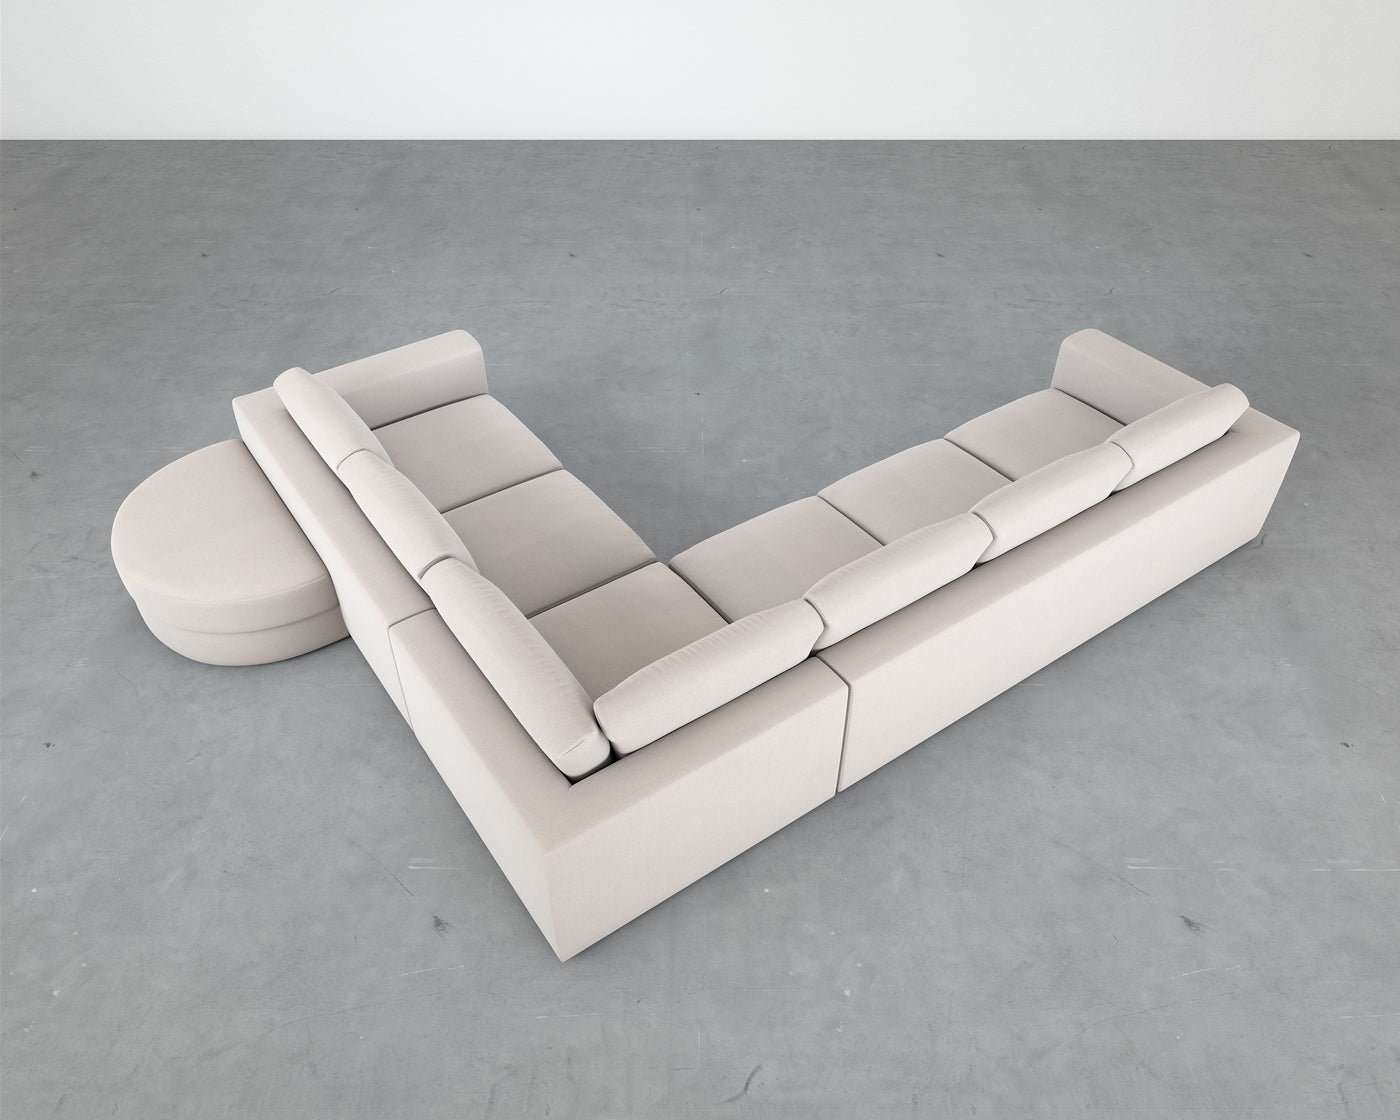 Tuxxy Sectional 150" - Sectional